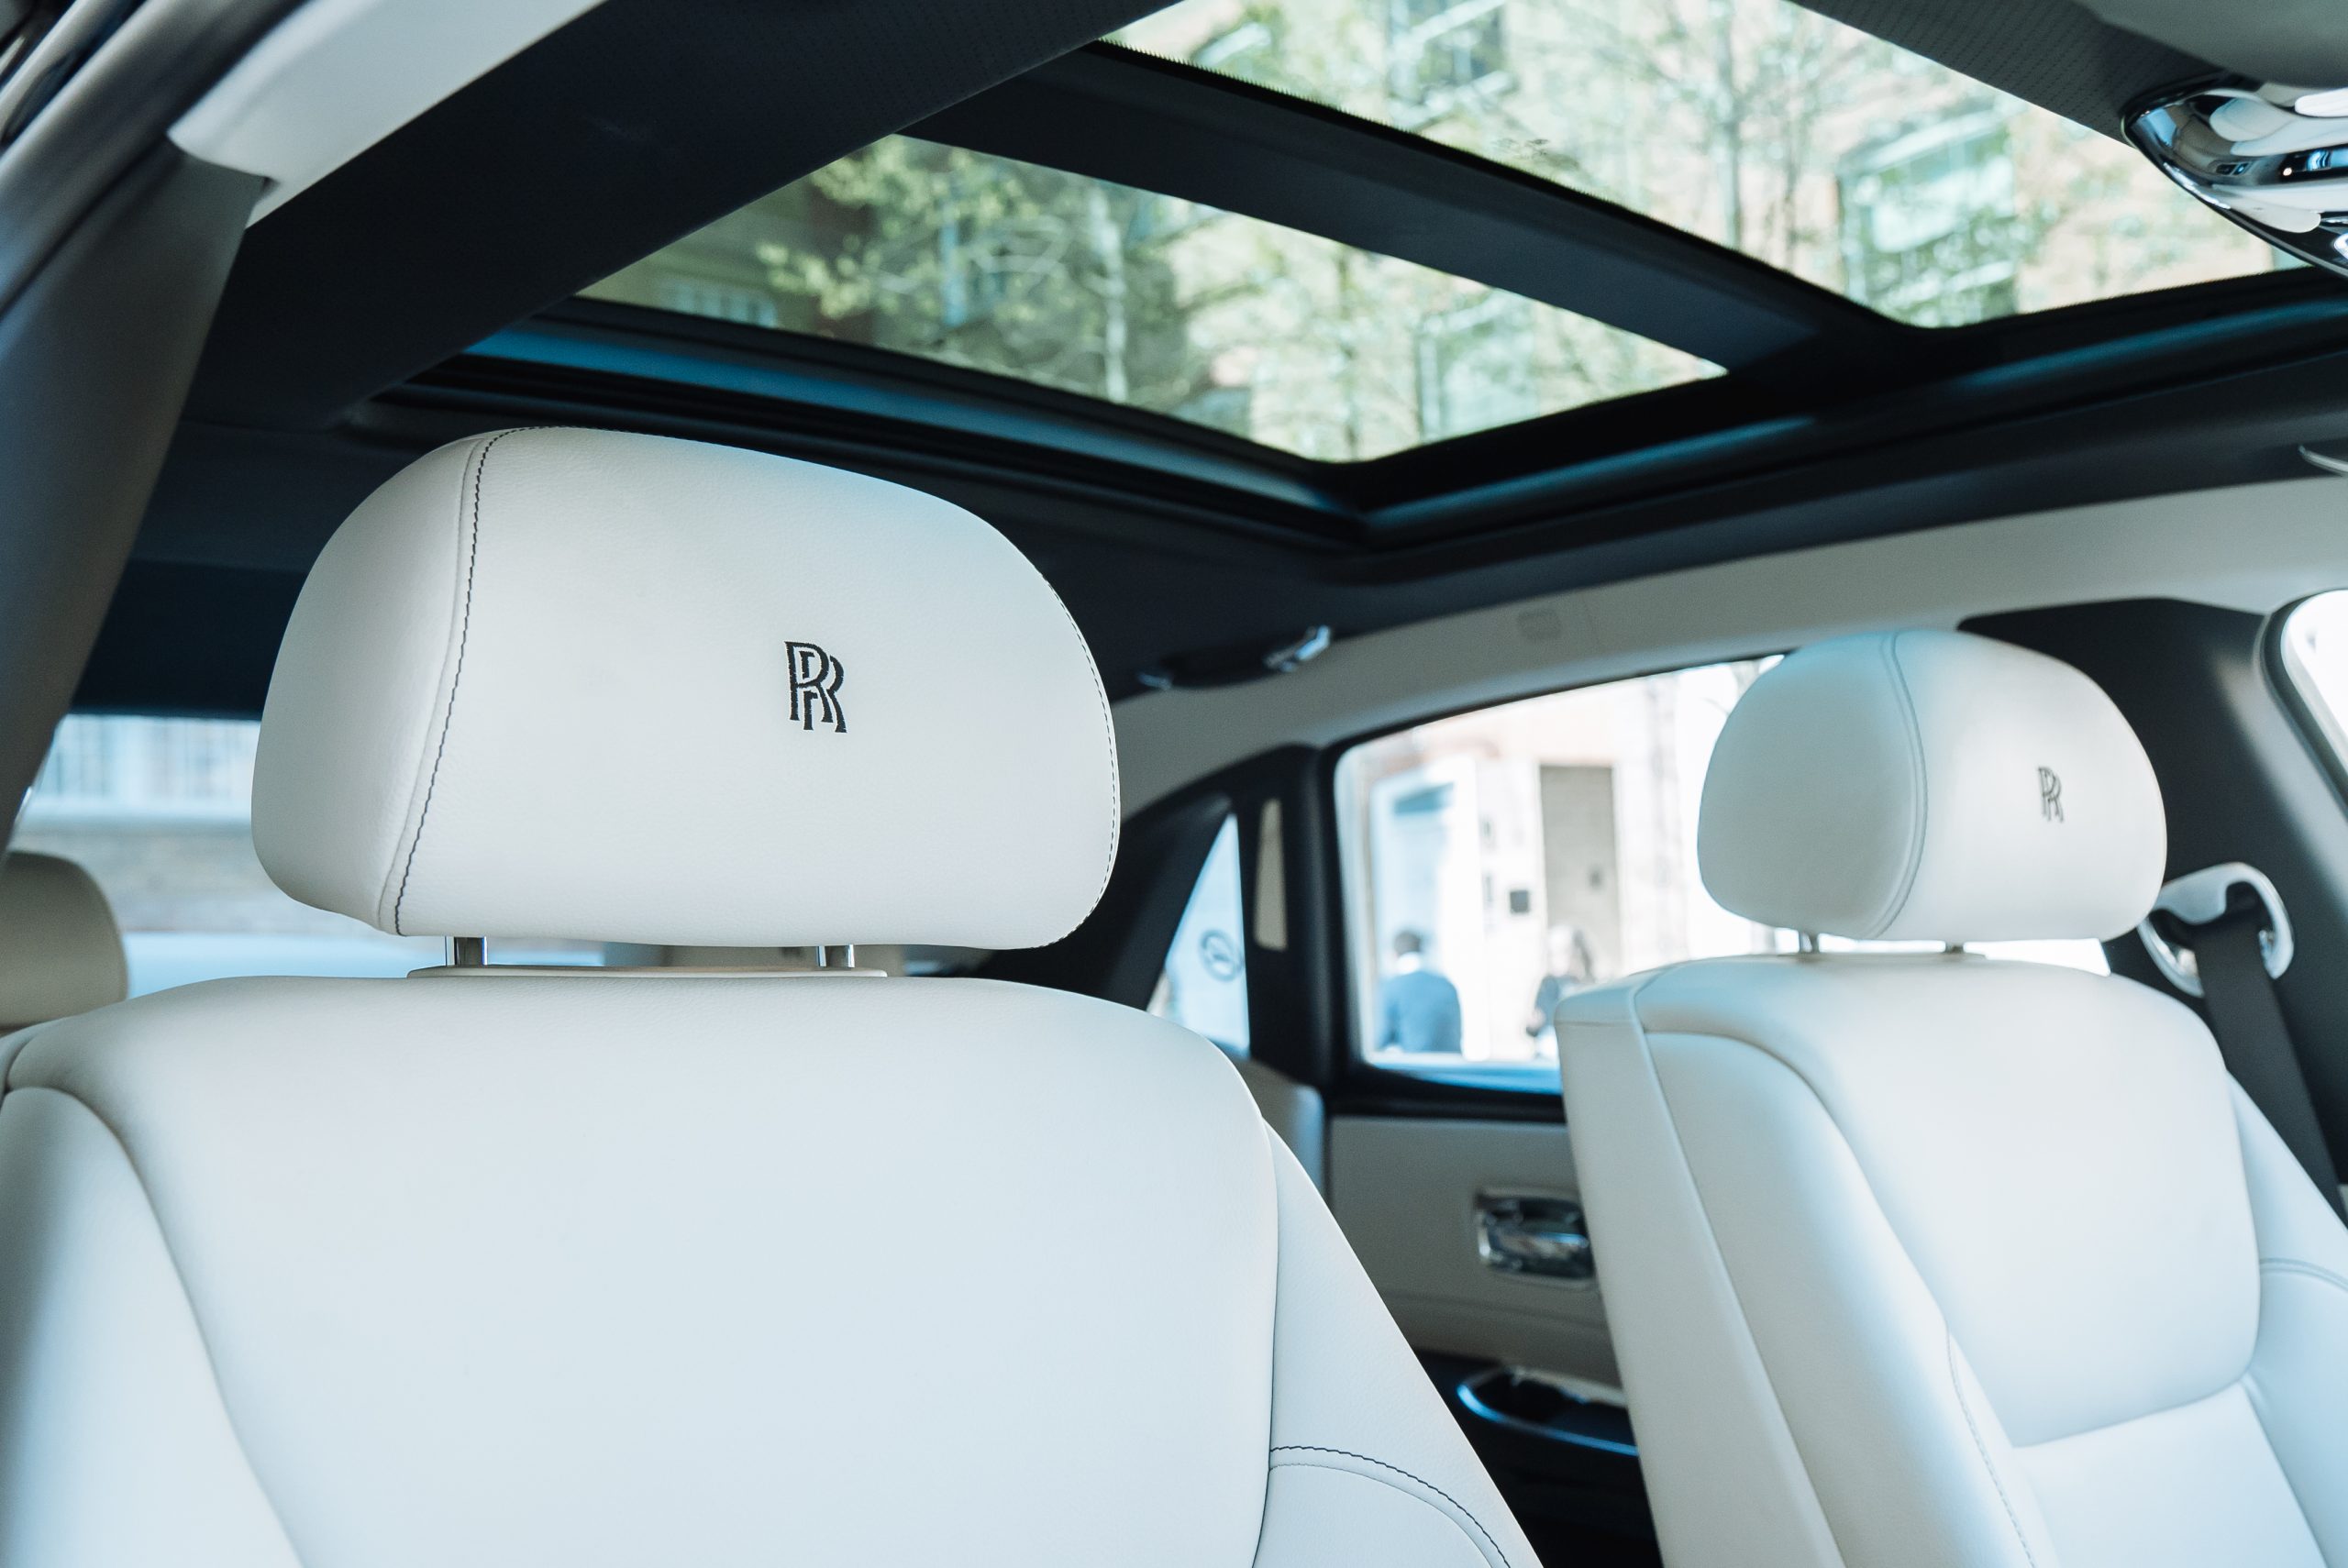 The Rolls Royce Ghost available for hire at London by AZLuxe Luxury Chauffeur Company.